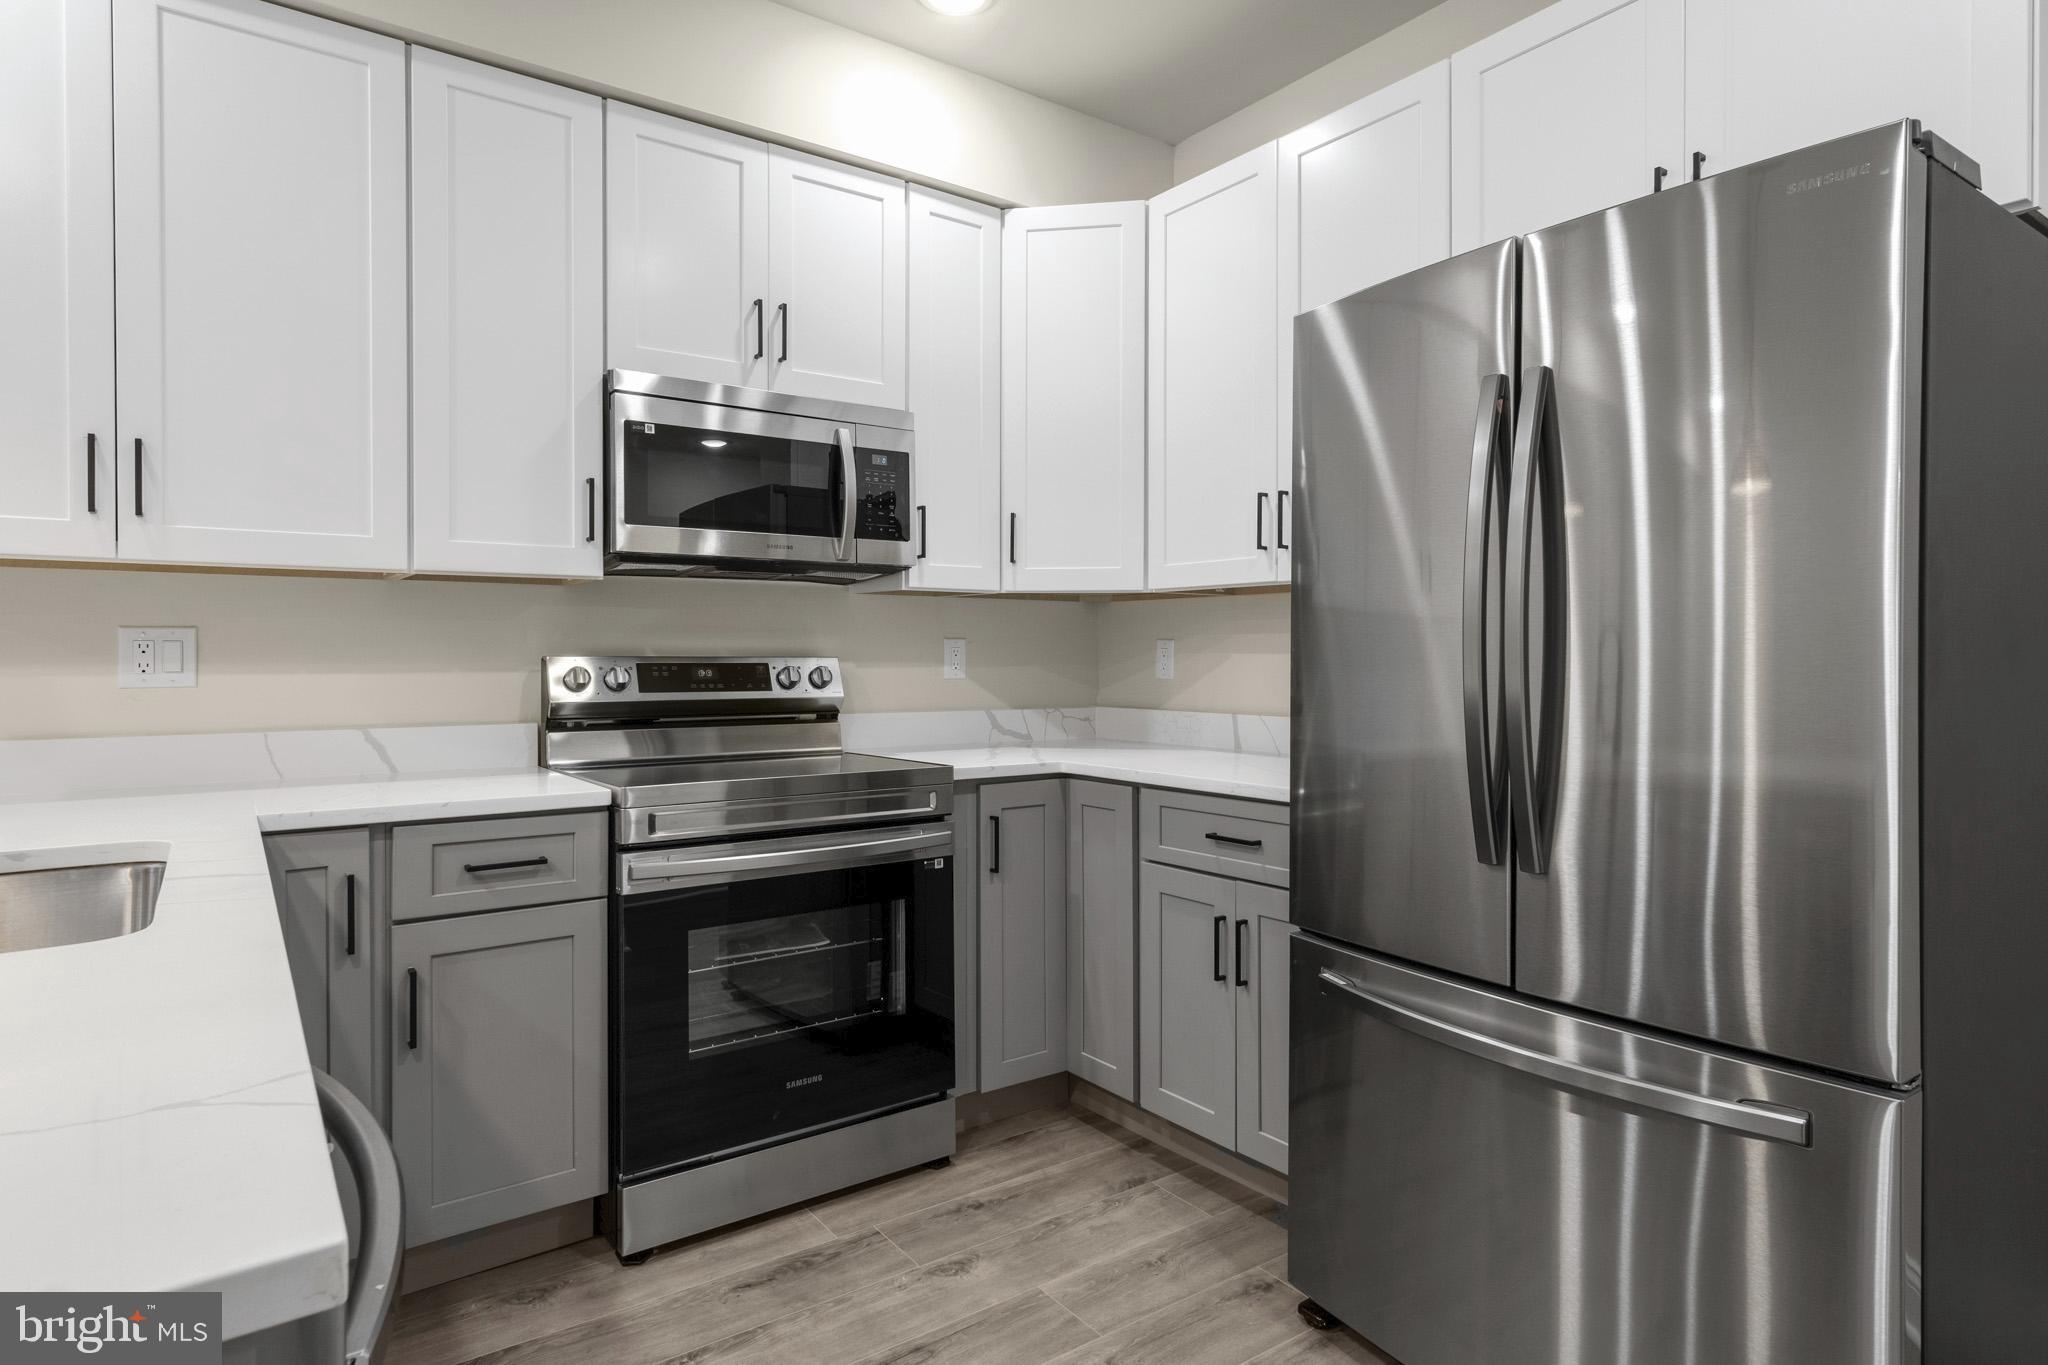 a kitchen with stainless steel appliances white cabinets white stove a refrigerator and a microwave